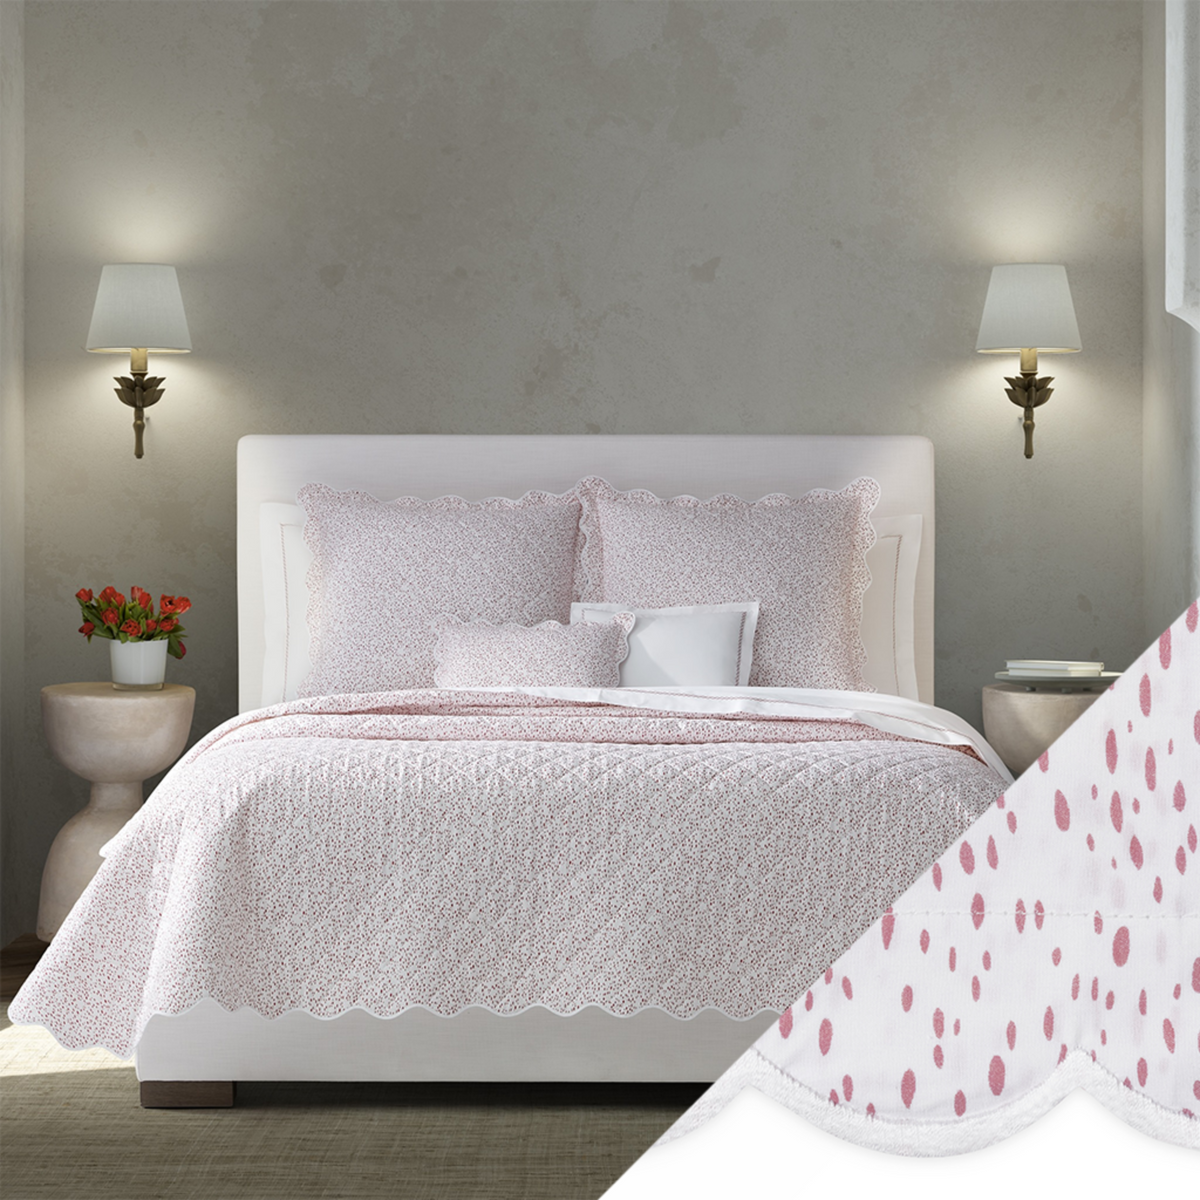 Full Bed Dressed in Matouk Celine Bedding with Swatch in Pink Color